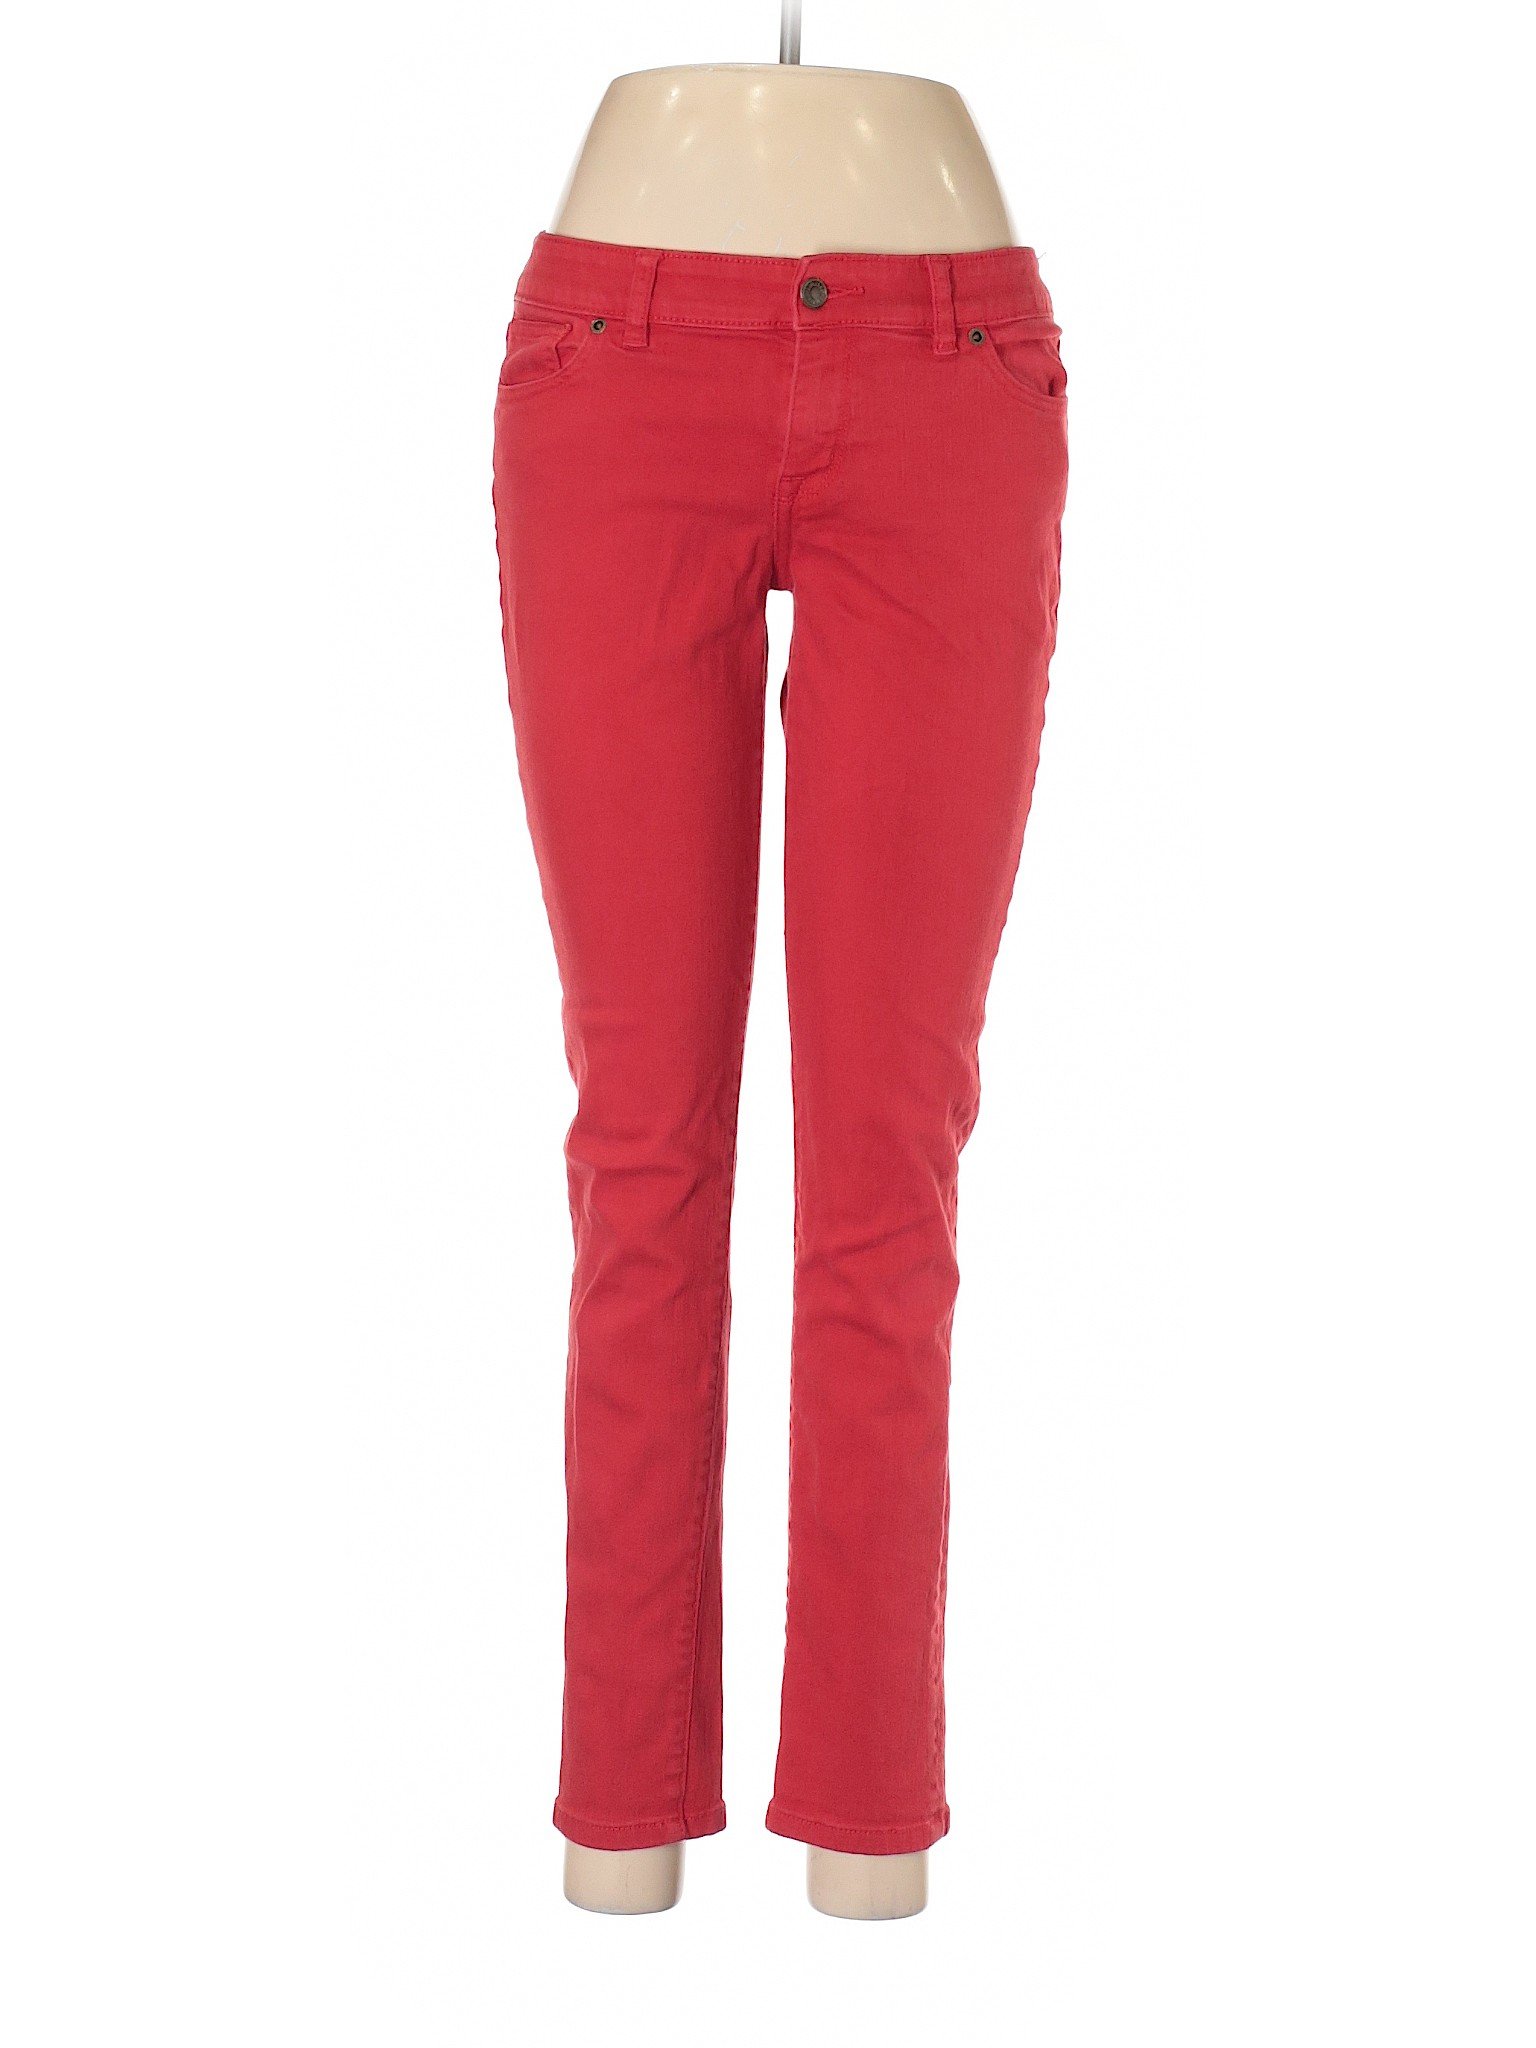 The Limited Women Red Jeans 8 | eBay